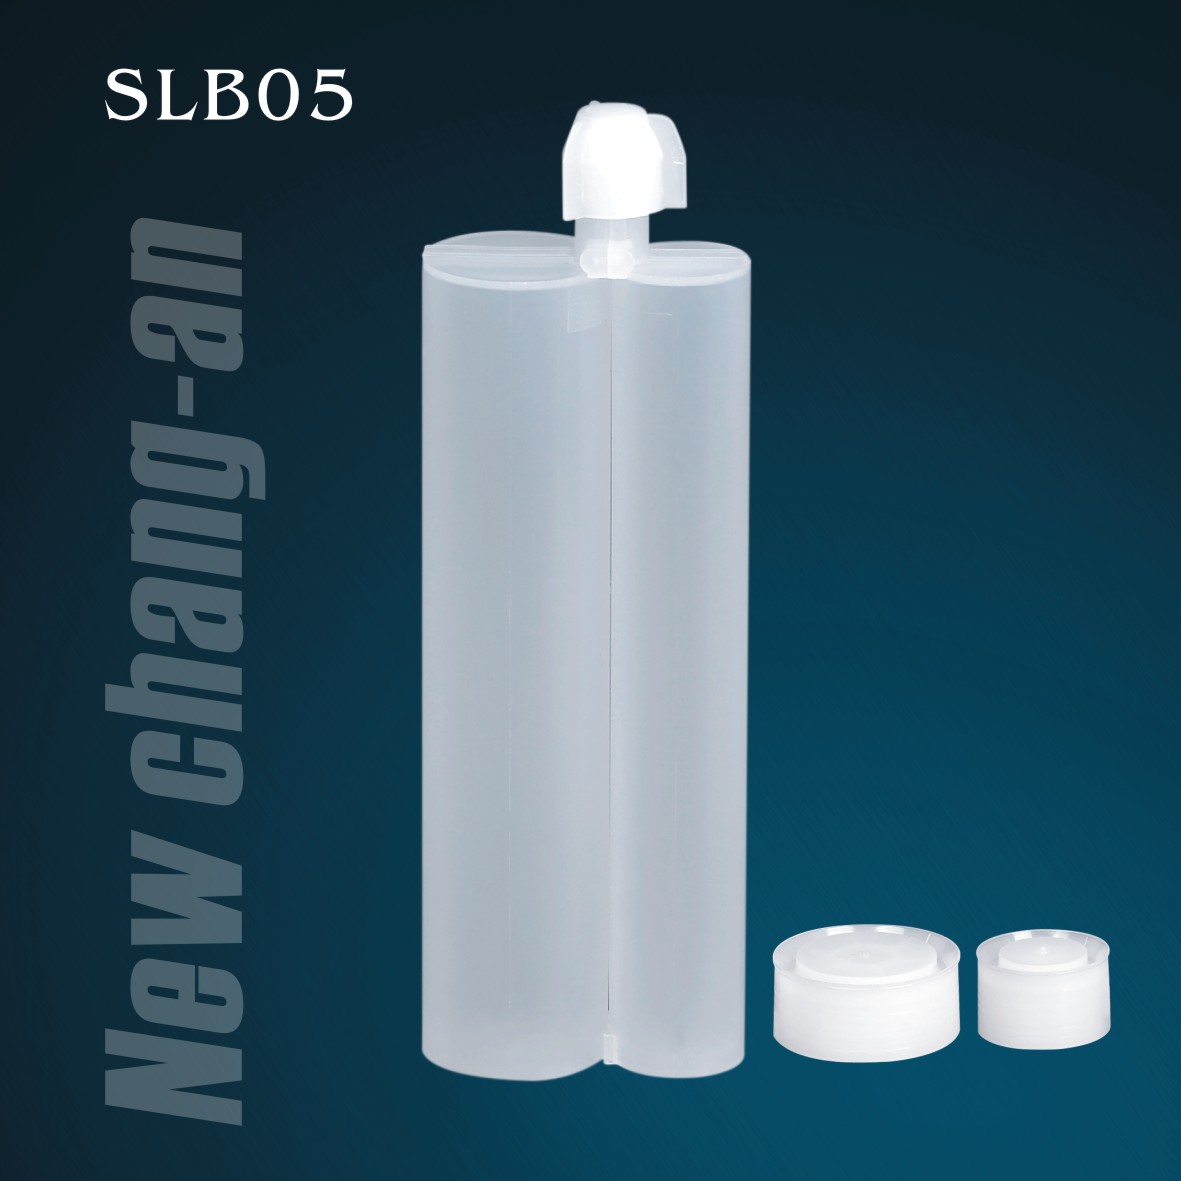 320ml:160ml Two-Component Dual Cartridge for Pack a+ B Adhesive SLB05